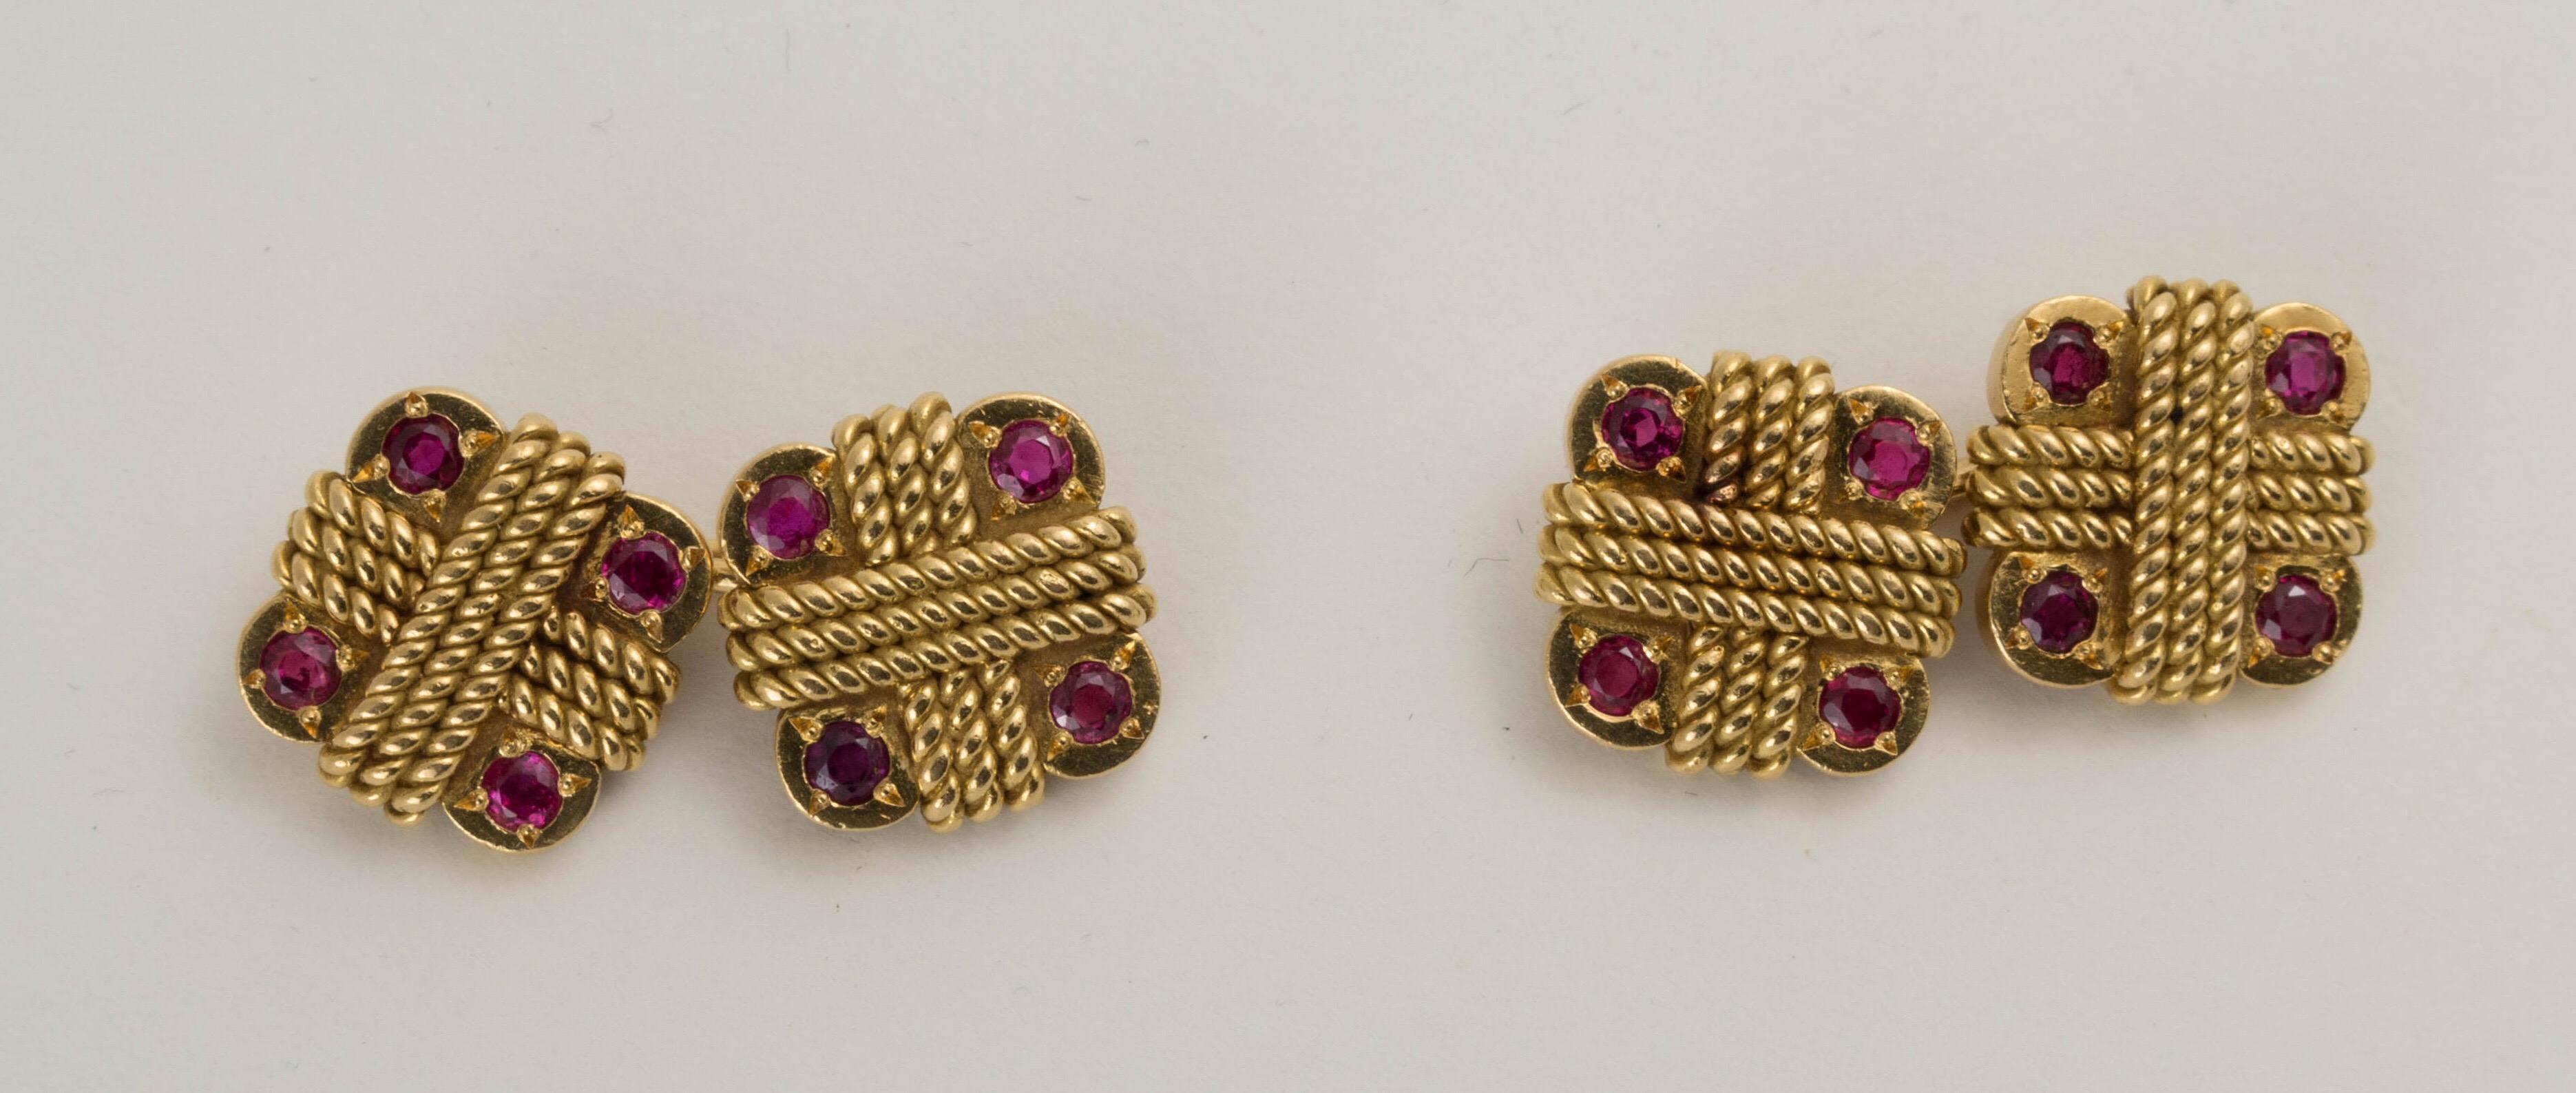 Van Cleef & Arpels 1960's Gold and Ruby Cufflinks For Sale 2